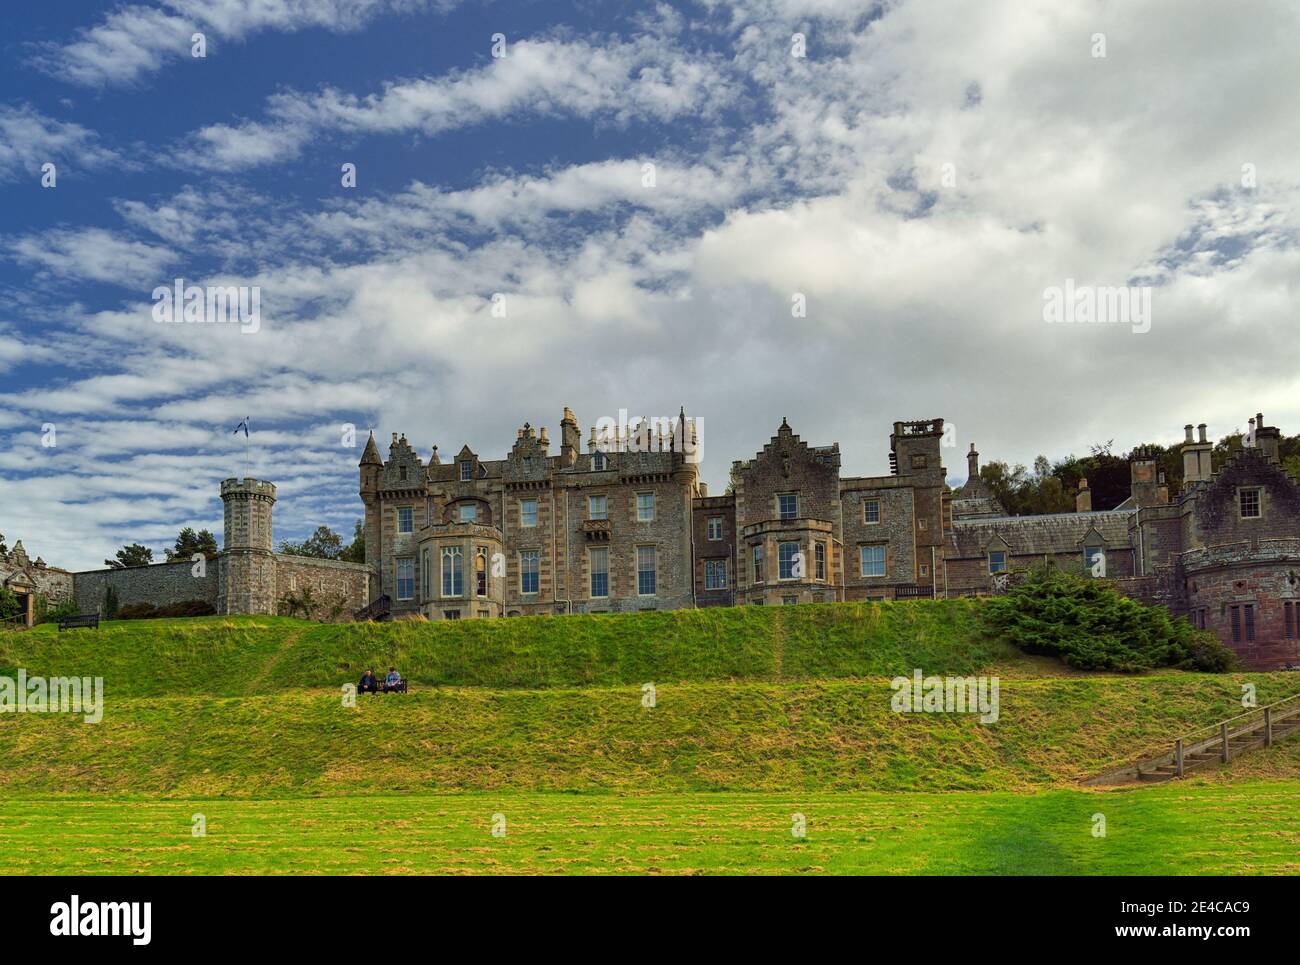 Park of Abbotsford Castle, Melrose in the Scottish Borders Council Area in southern Scotland, Great Britain, British Isles Stock Photo